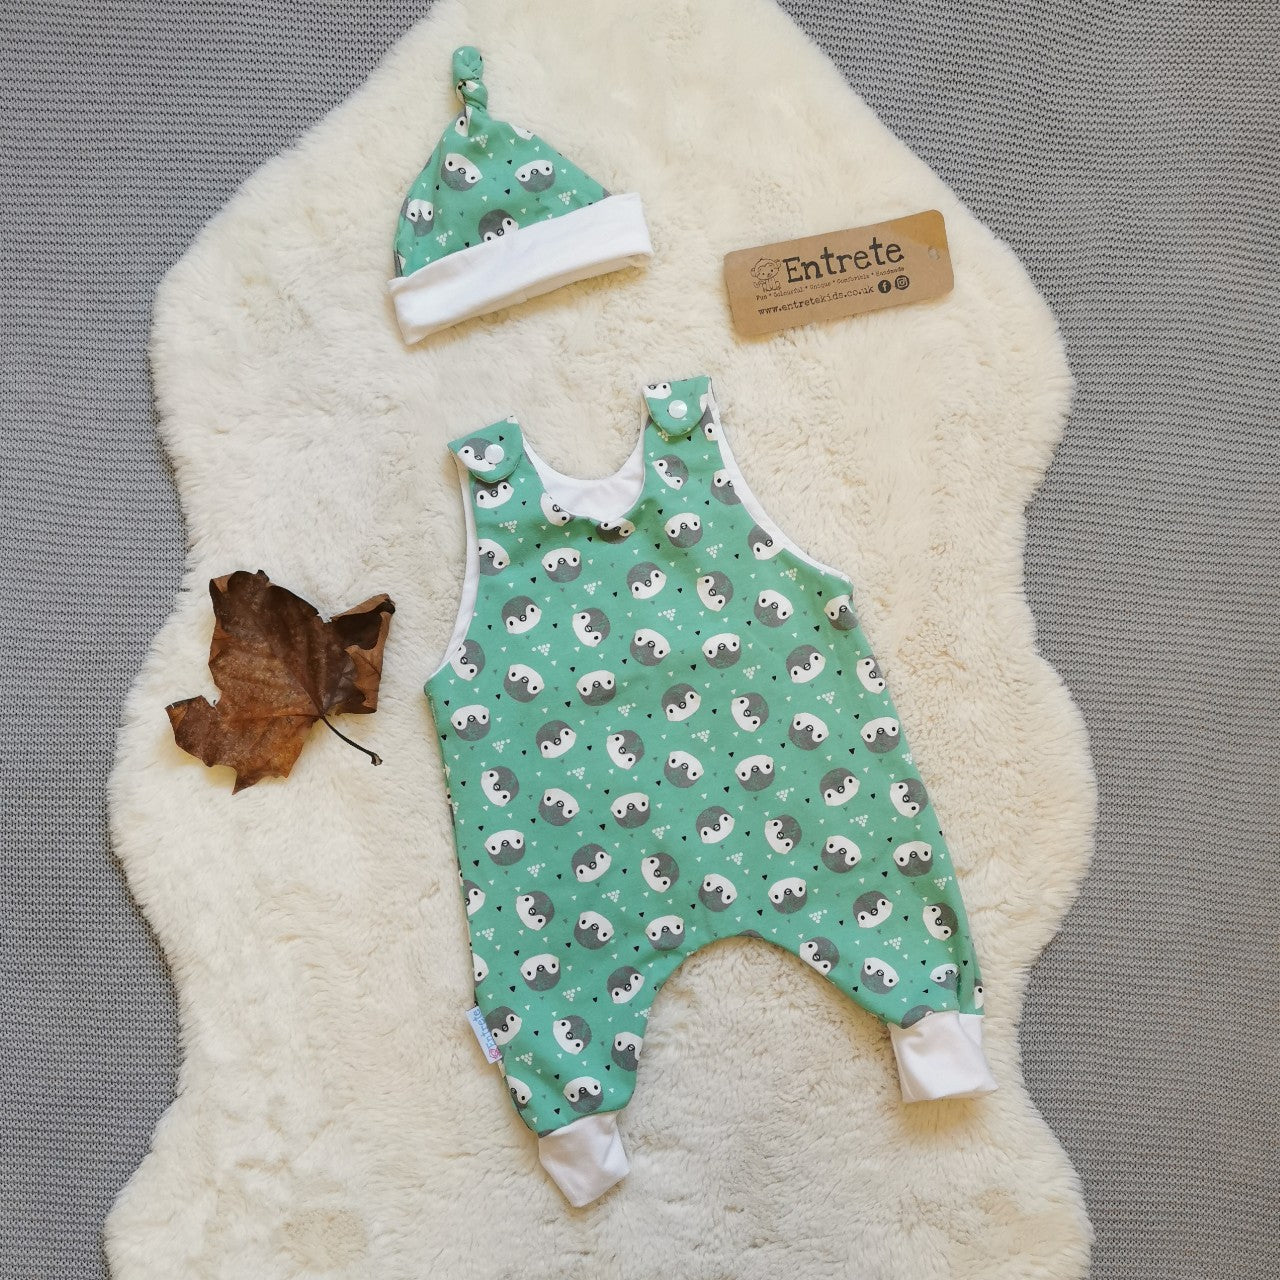 A romper gift set shown in mint penguins for demonstration purposes, your gift set will be handmade using navy chicks cotton jersey.